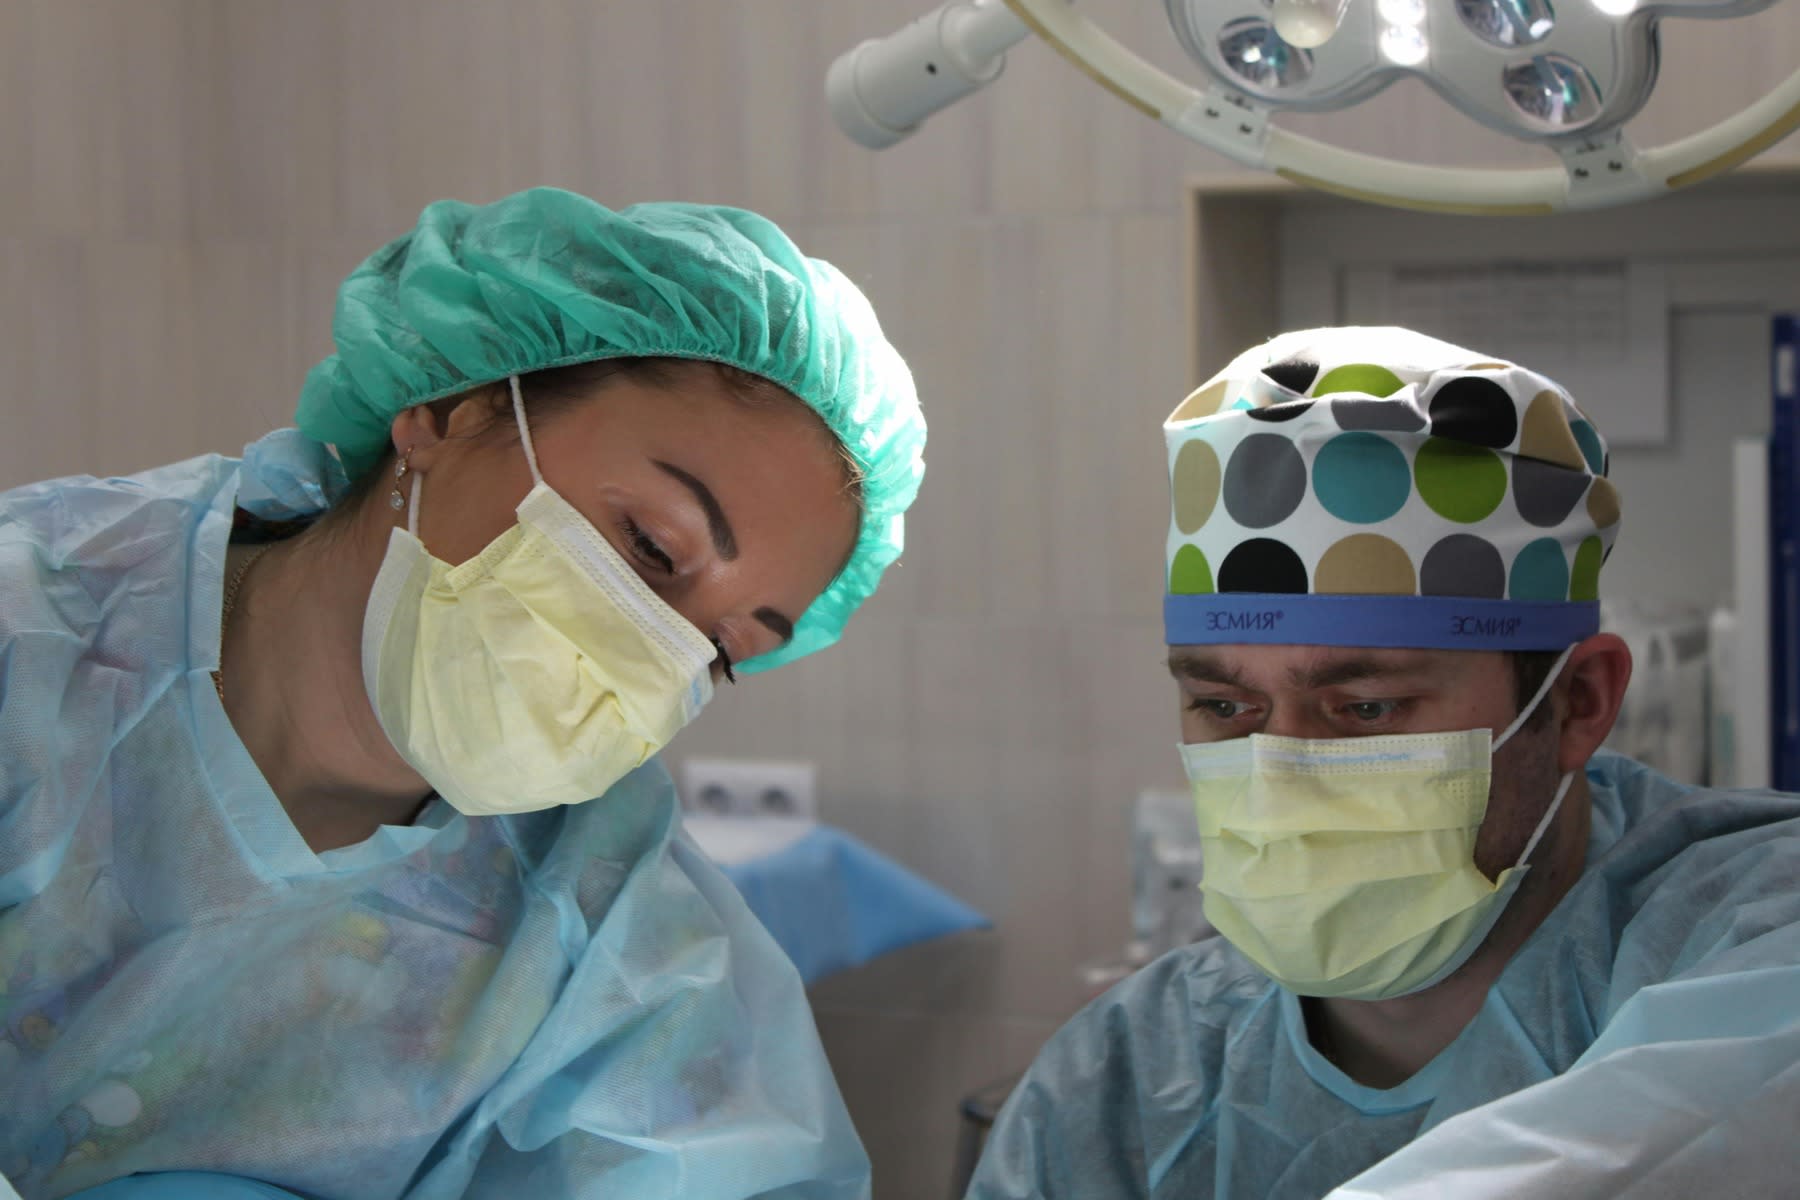 Two nurses wearing protective gear during an ongoing surgery